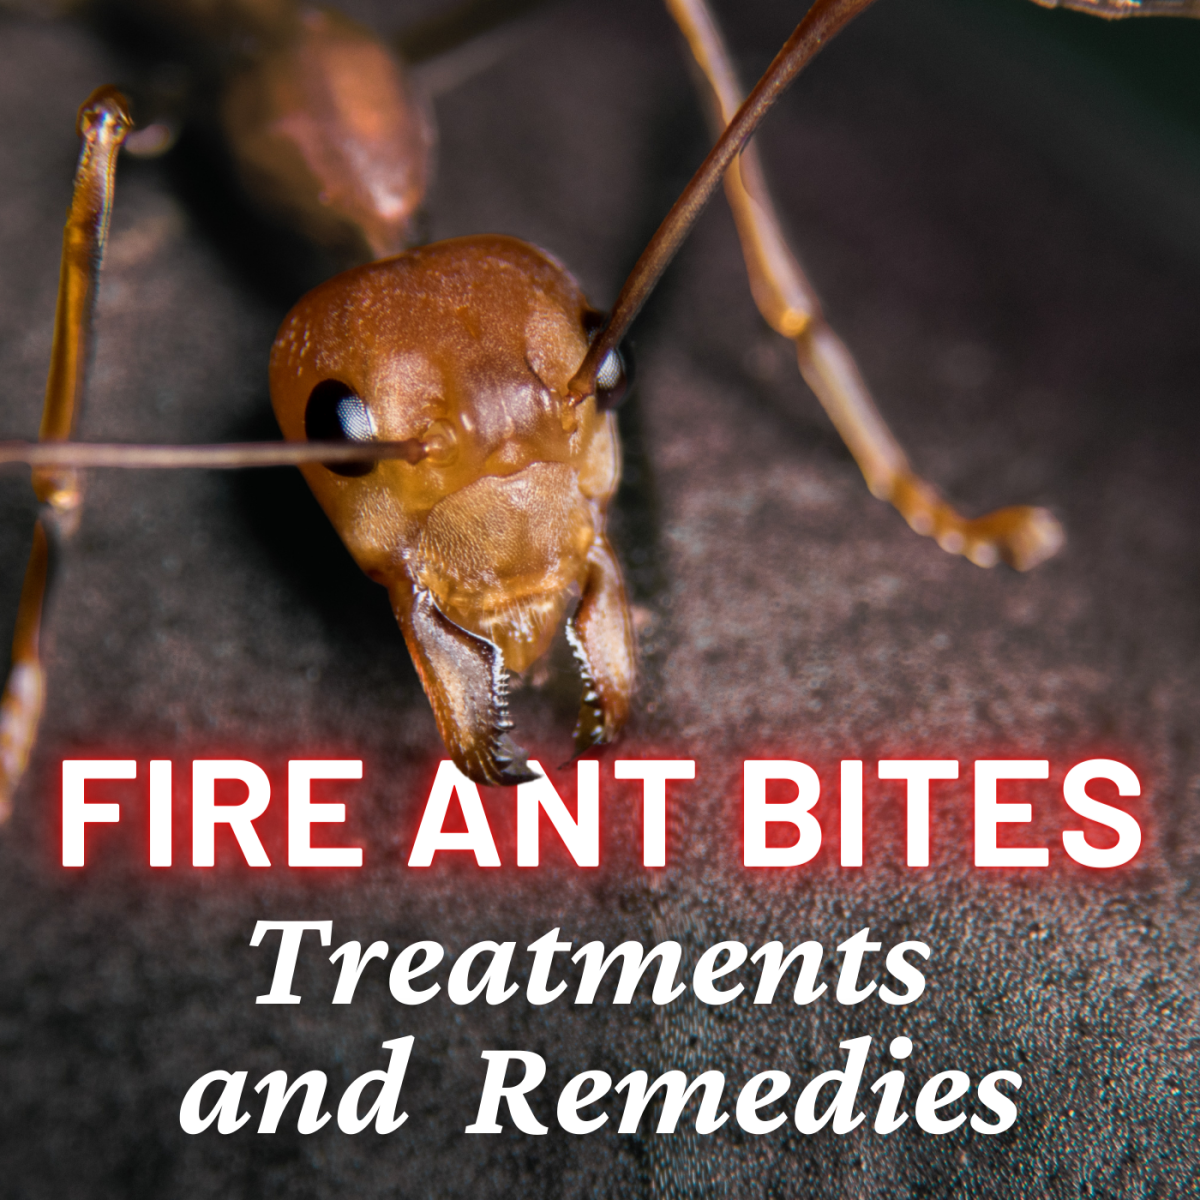 Home remedies for fire ant bites 